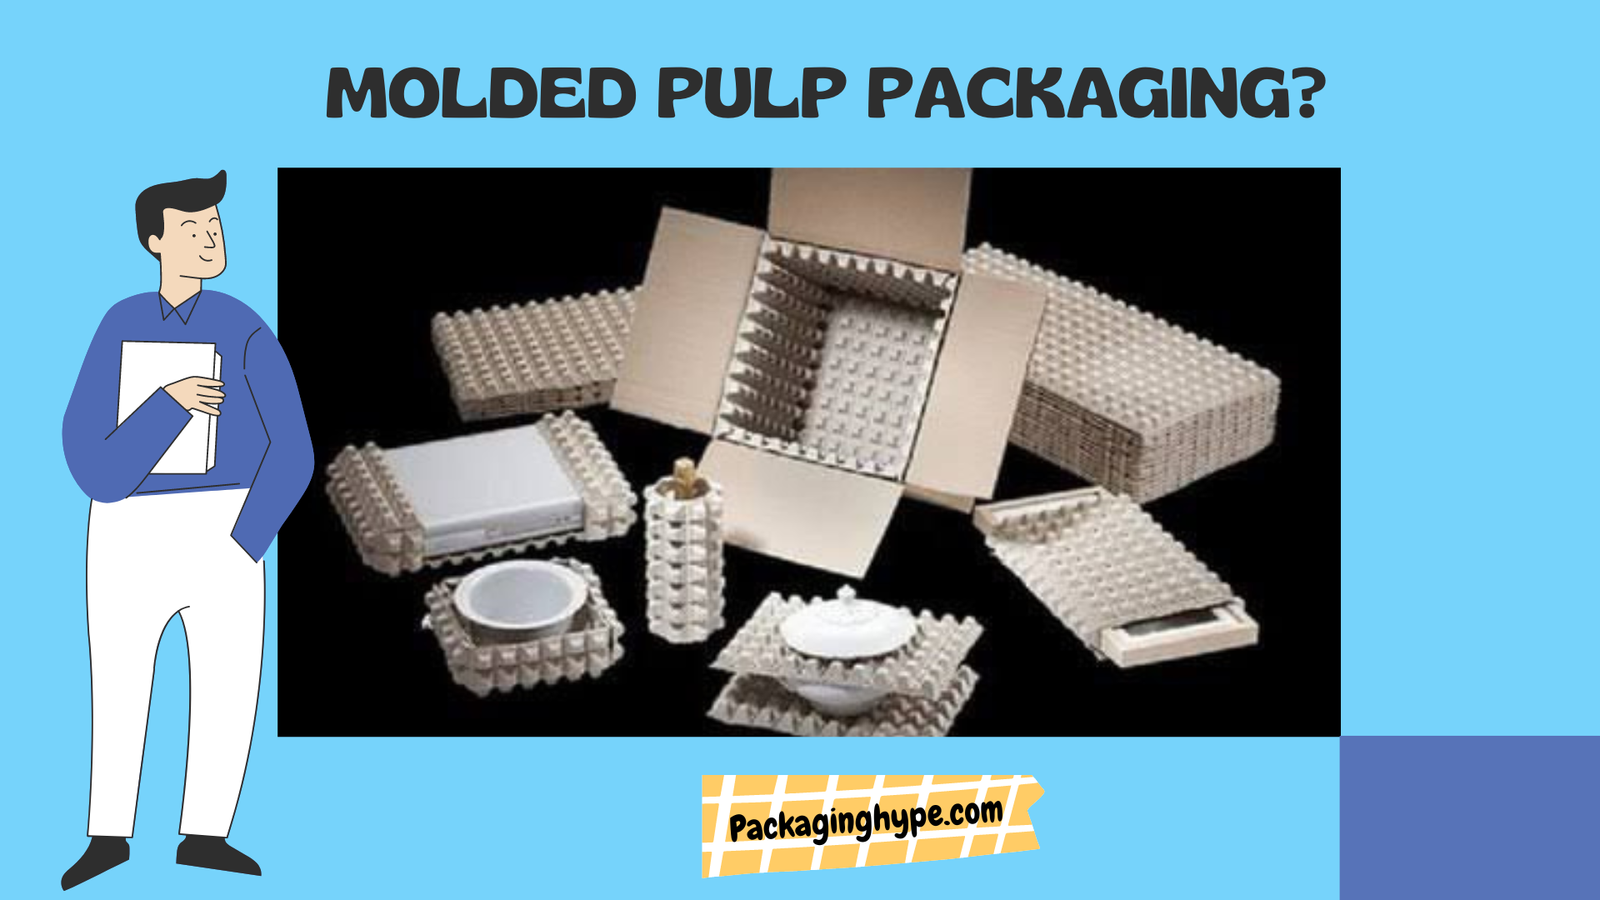 What Is Molded Pulp Packaging?